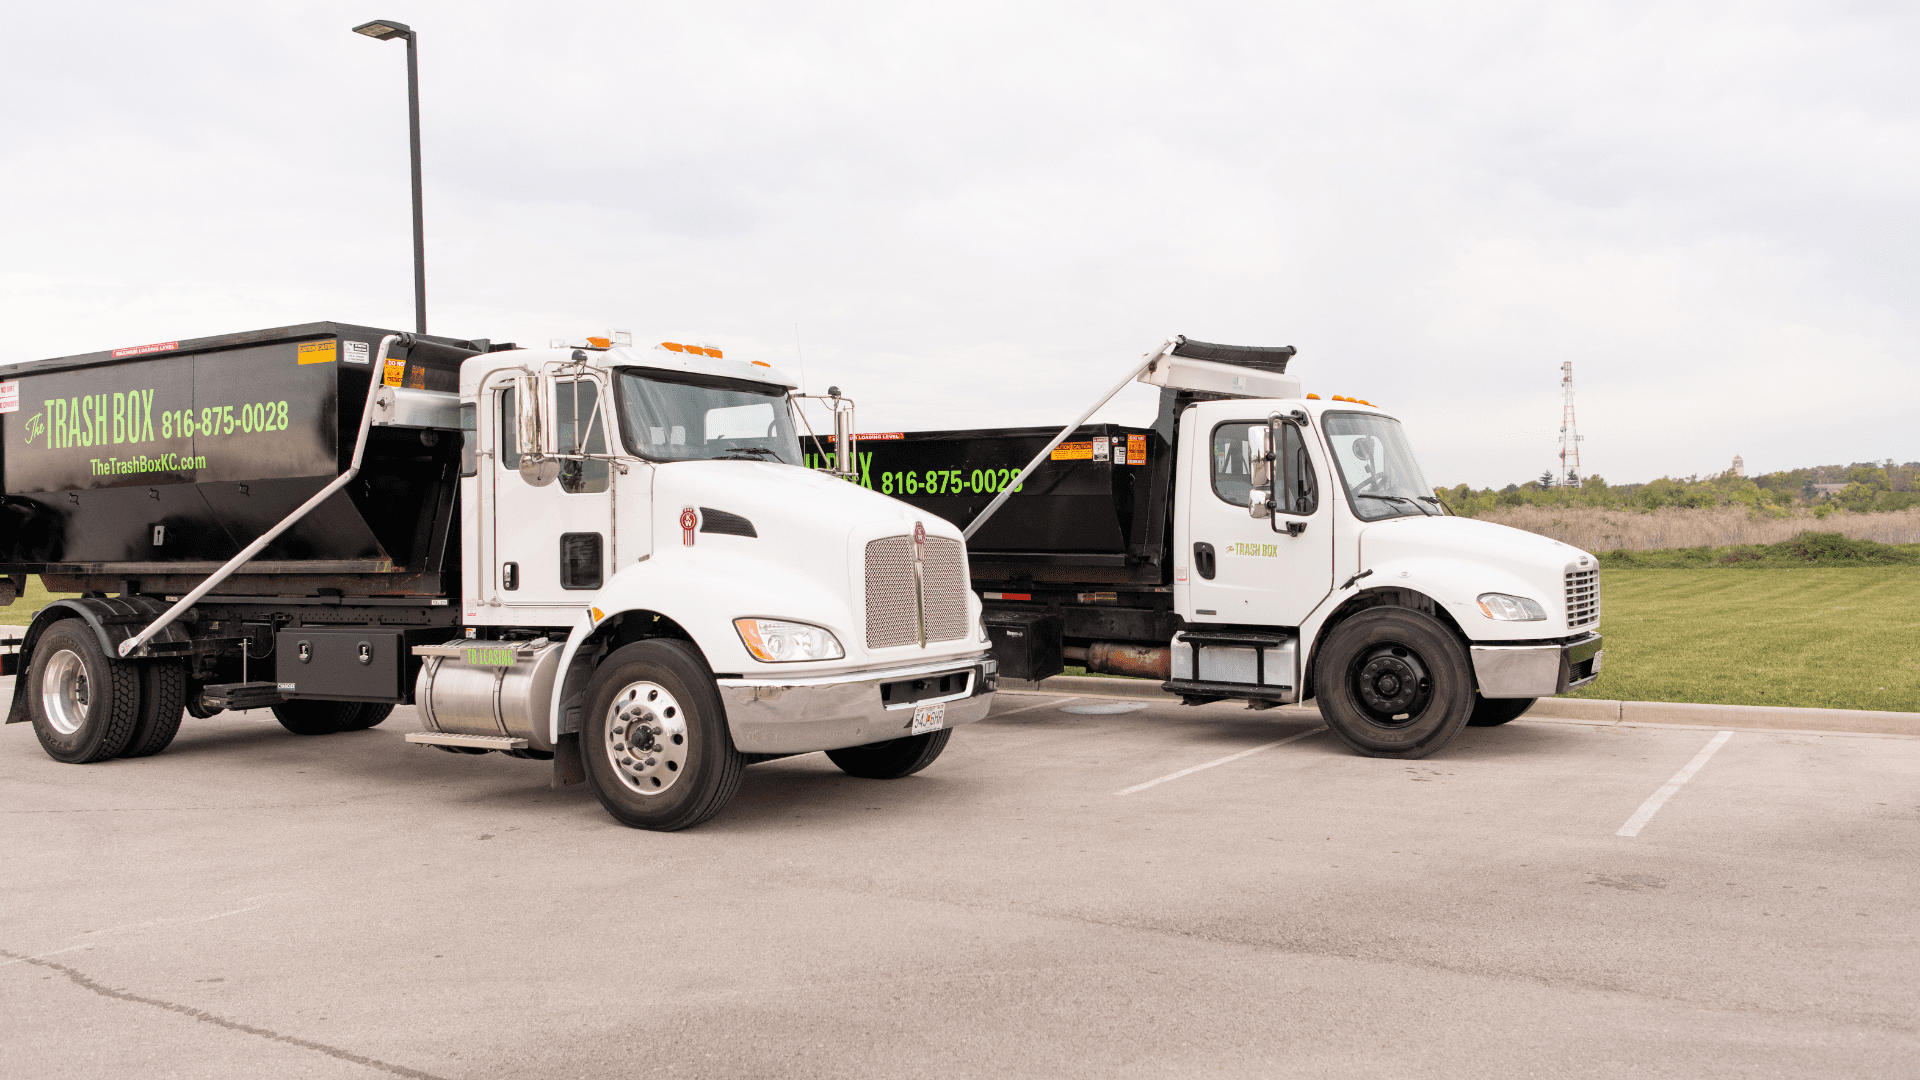 Need Dumpster Rental Services in Olathe?